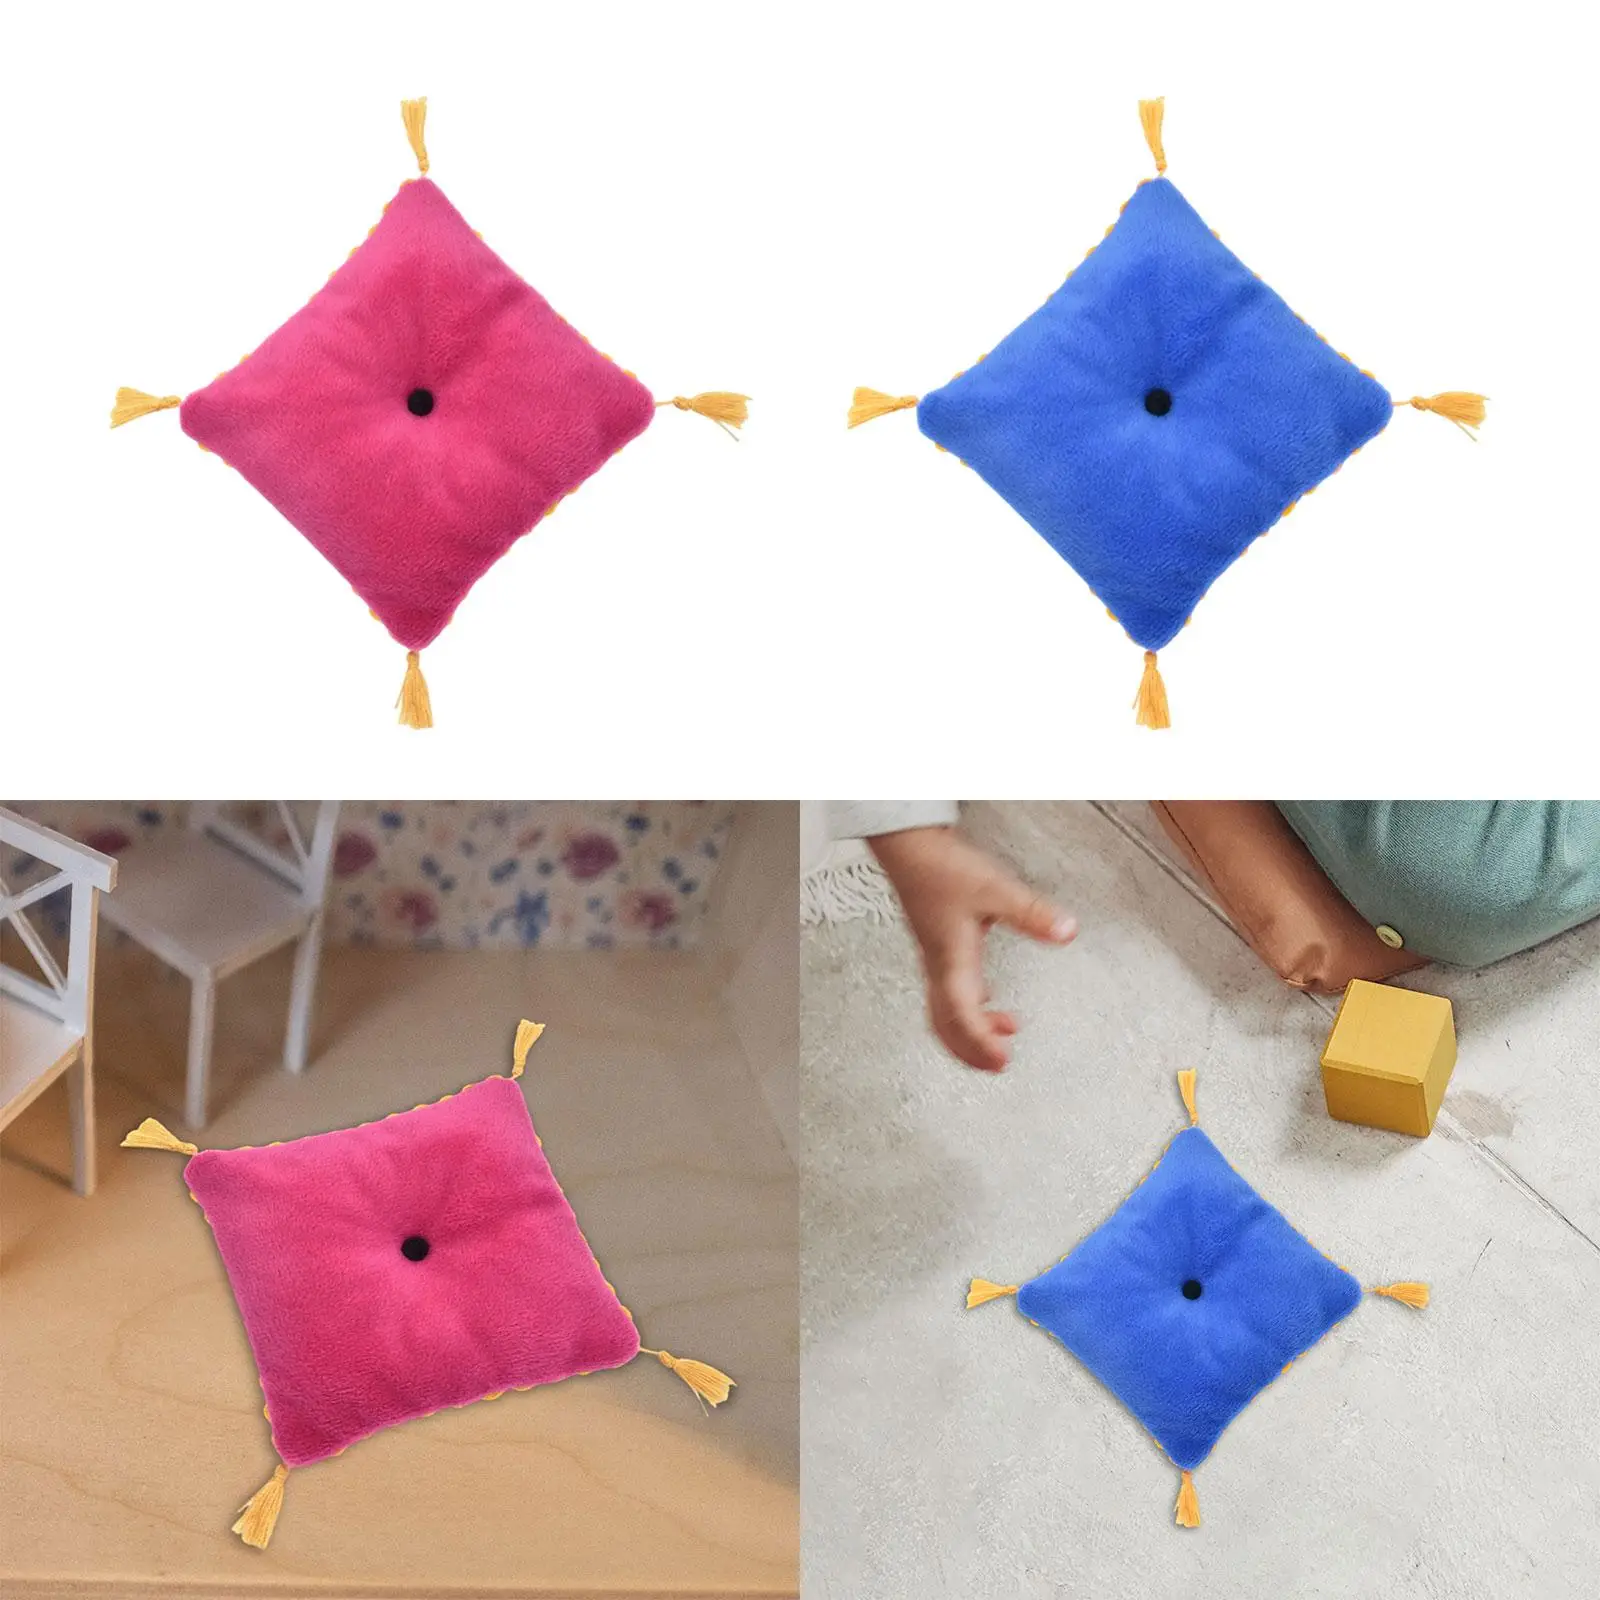 1:6 Scale Dollhouse Pillow Scenery Dollhouse Furniture for Girls Kids Gifts